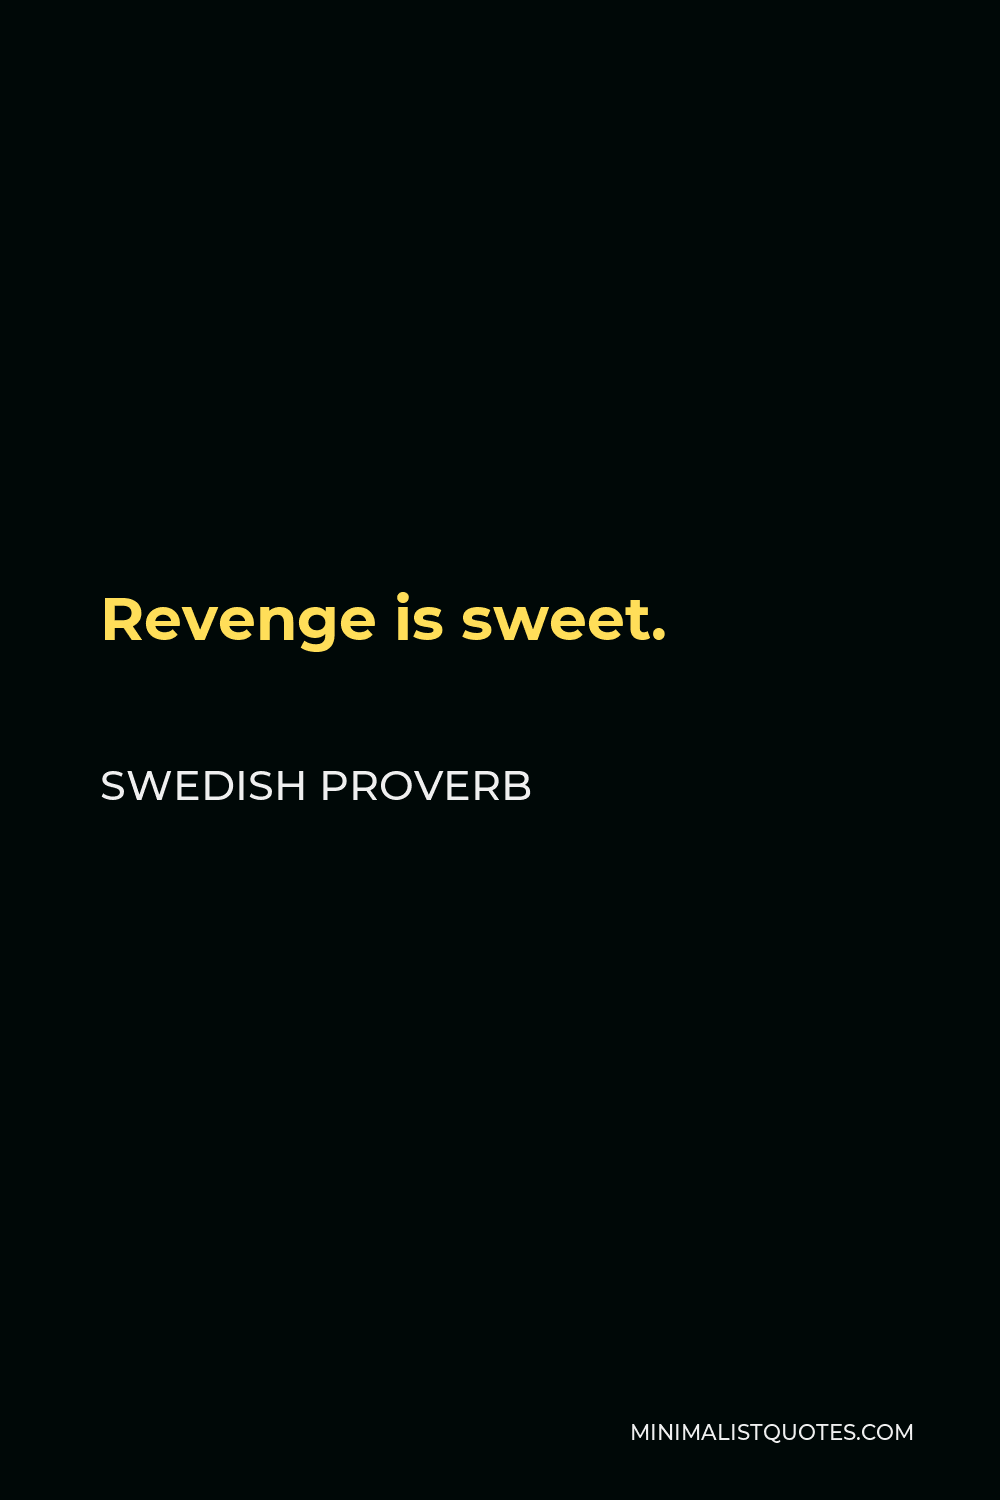 Swedish Proverb Quote - Revenge is sweet.